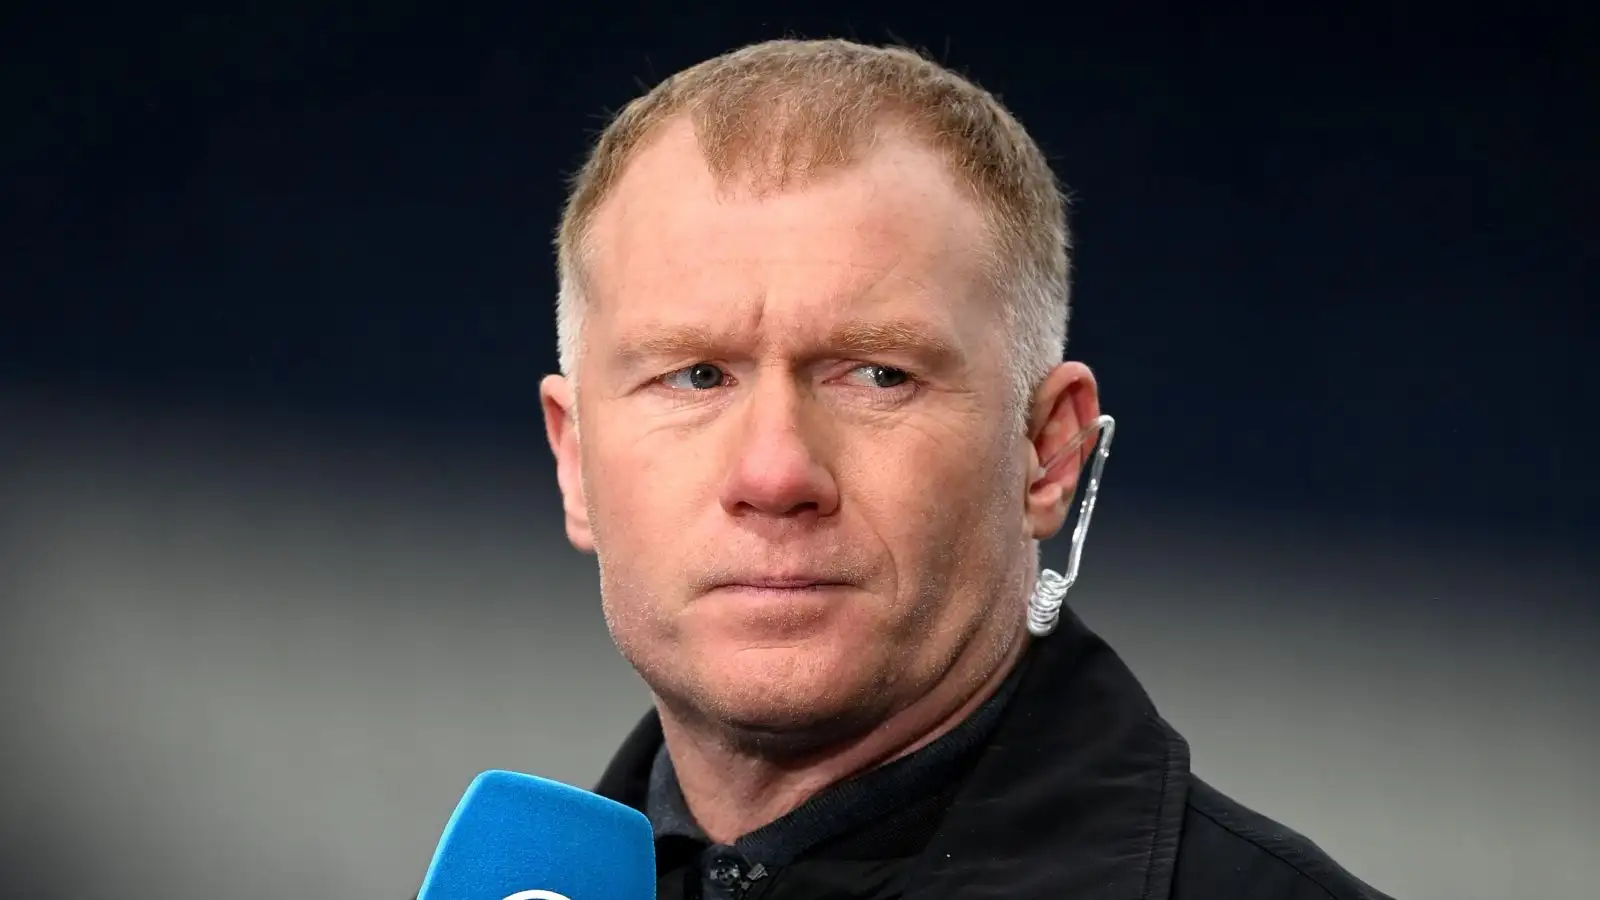 Scholes opens up on drinking habits which “worried” Man Utd enough to call home